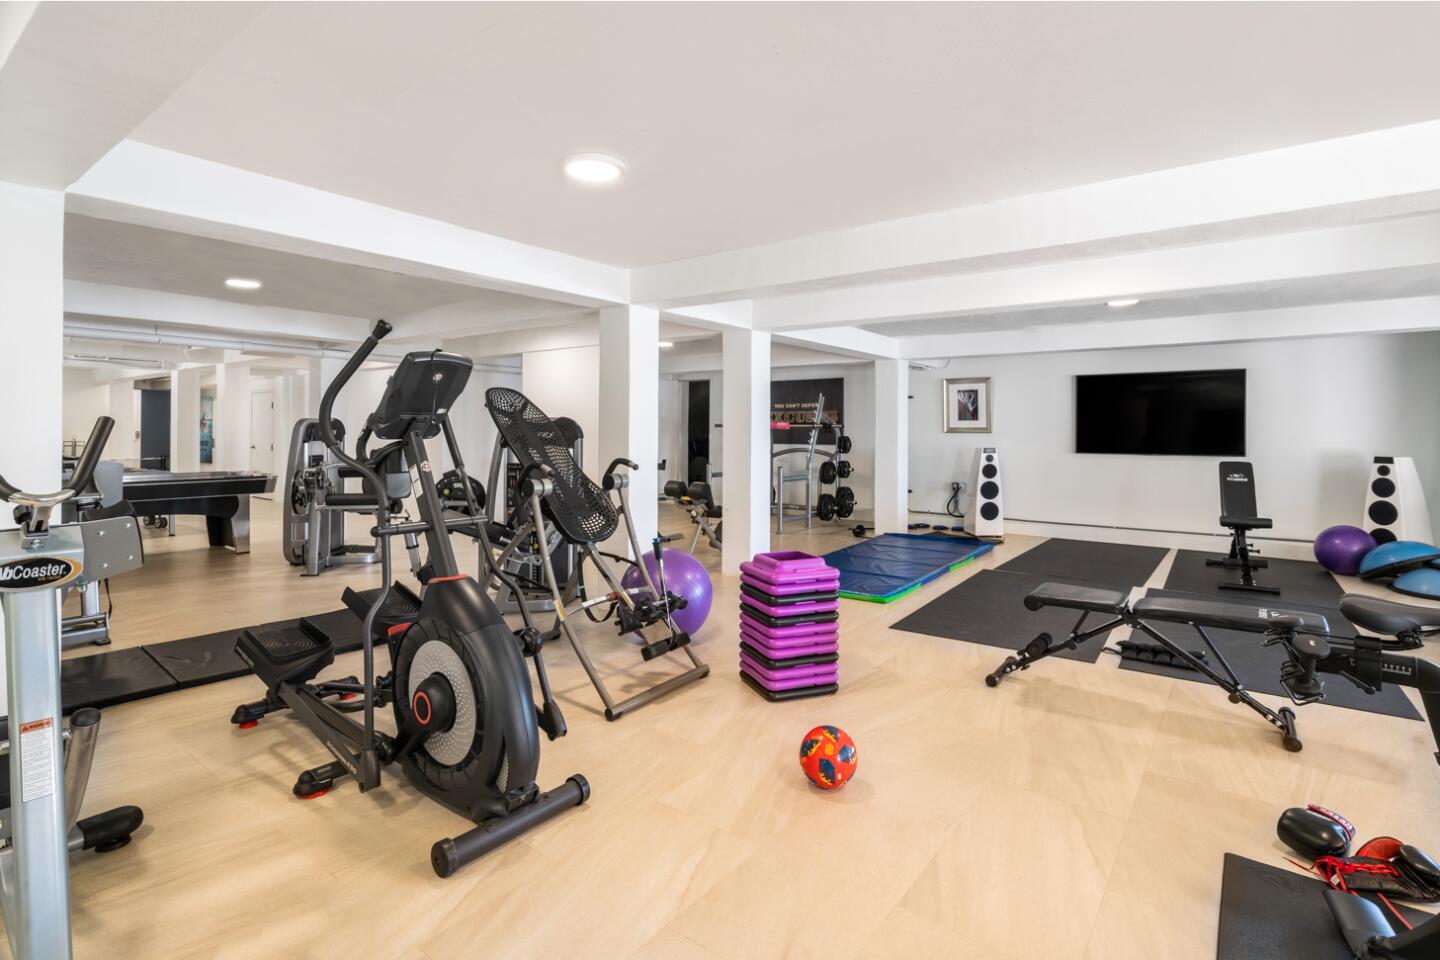 A workout room is spacious with mirrored walls.